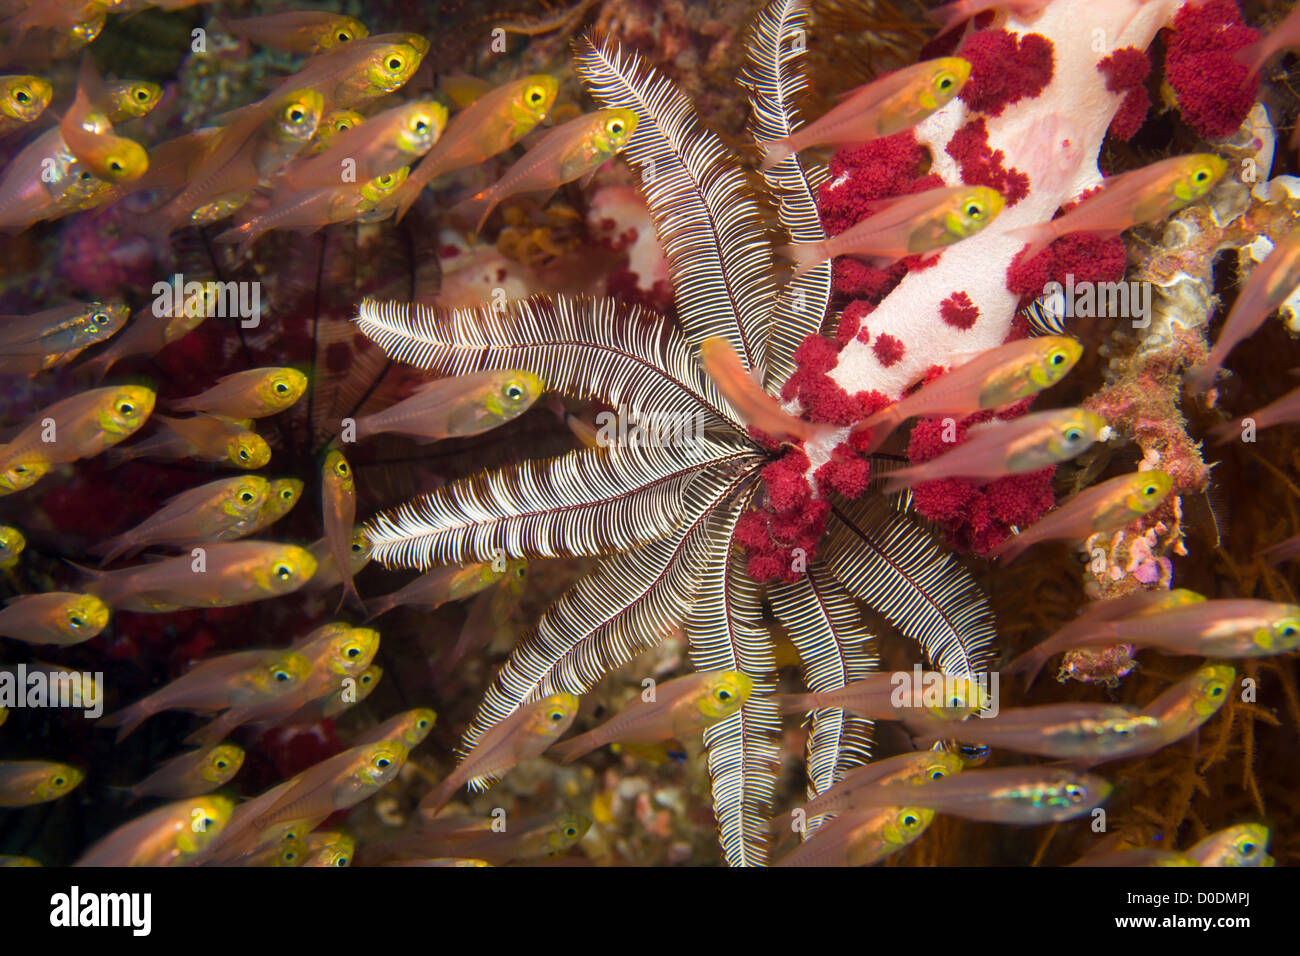 Underwater Image of Golden Sweepers and Feather Star, Indonesia Stock Photo